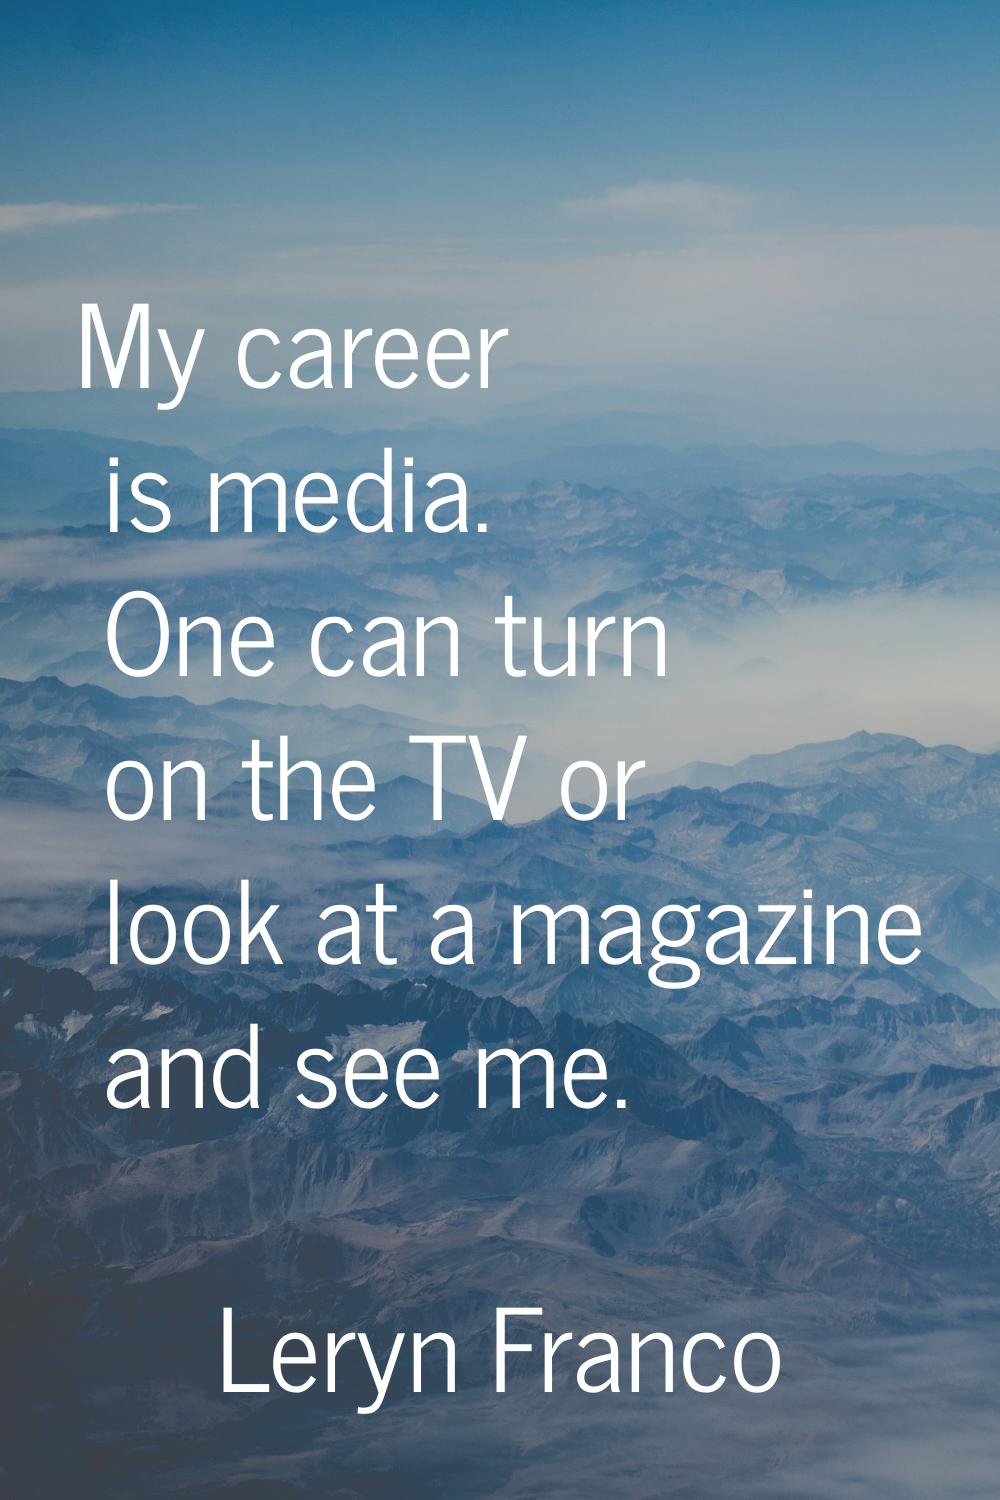 My career is media. One can turn on the TV or look at a magazine and see me.